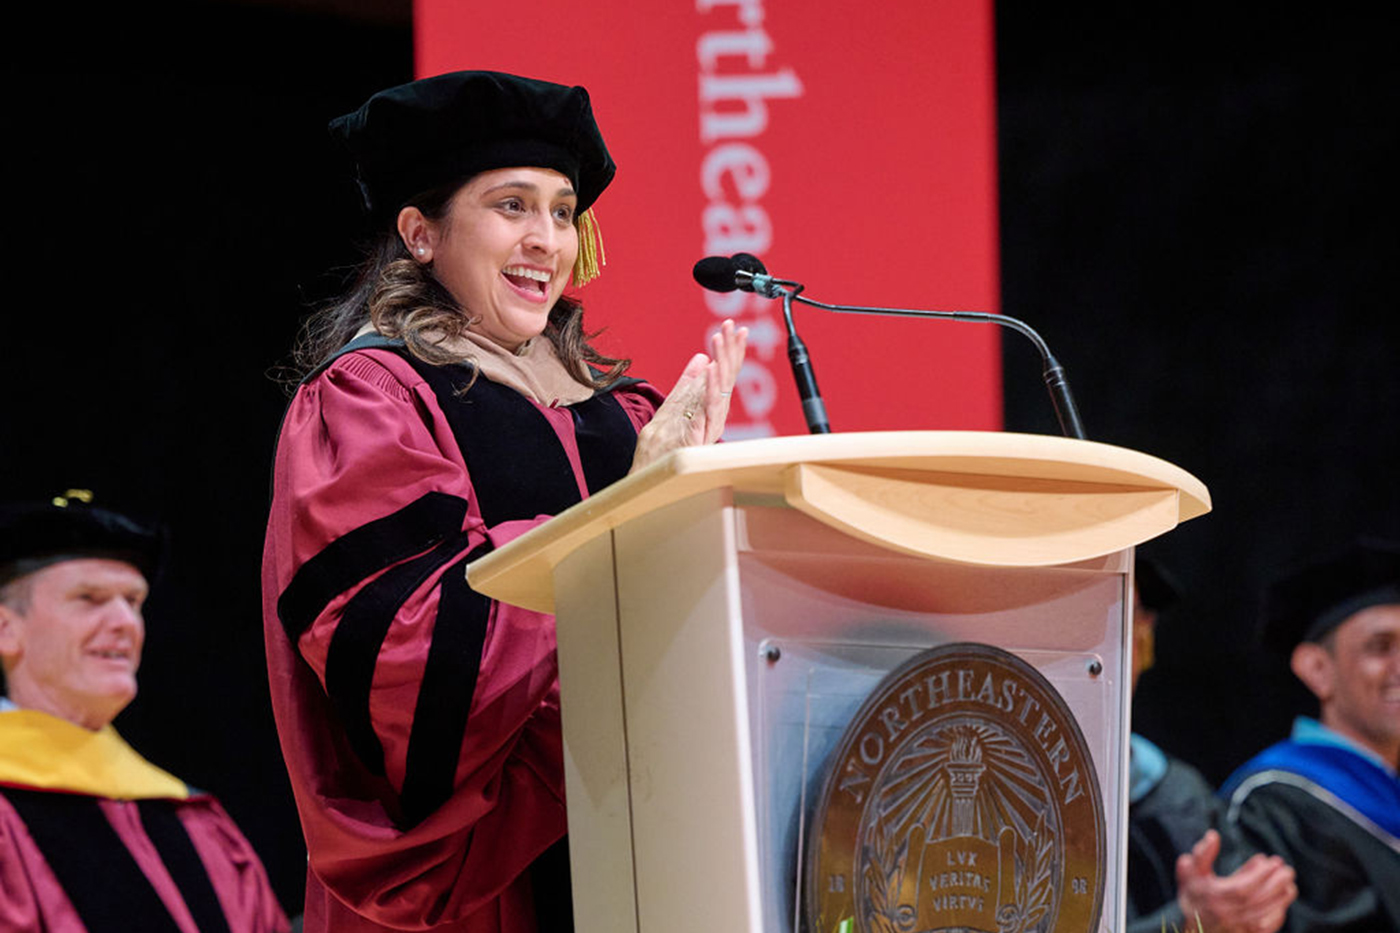 A speaker at Northeastern's Toronto convocation.